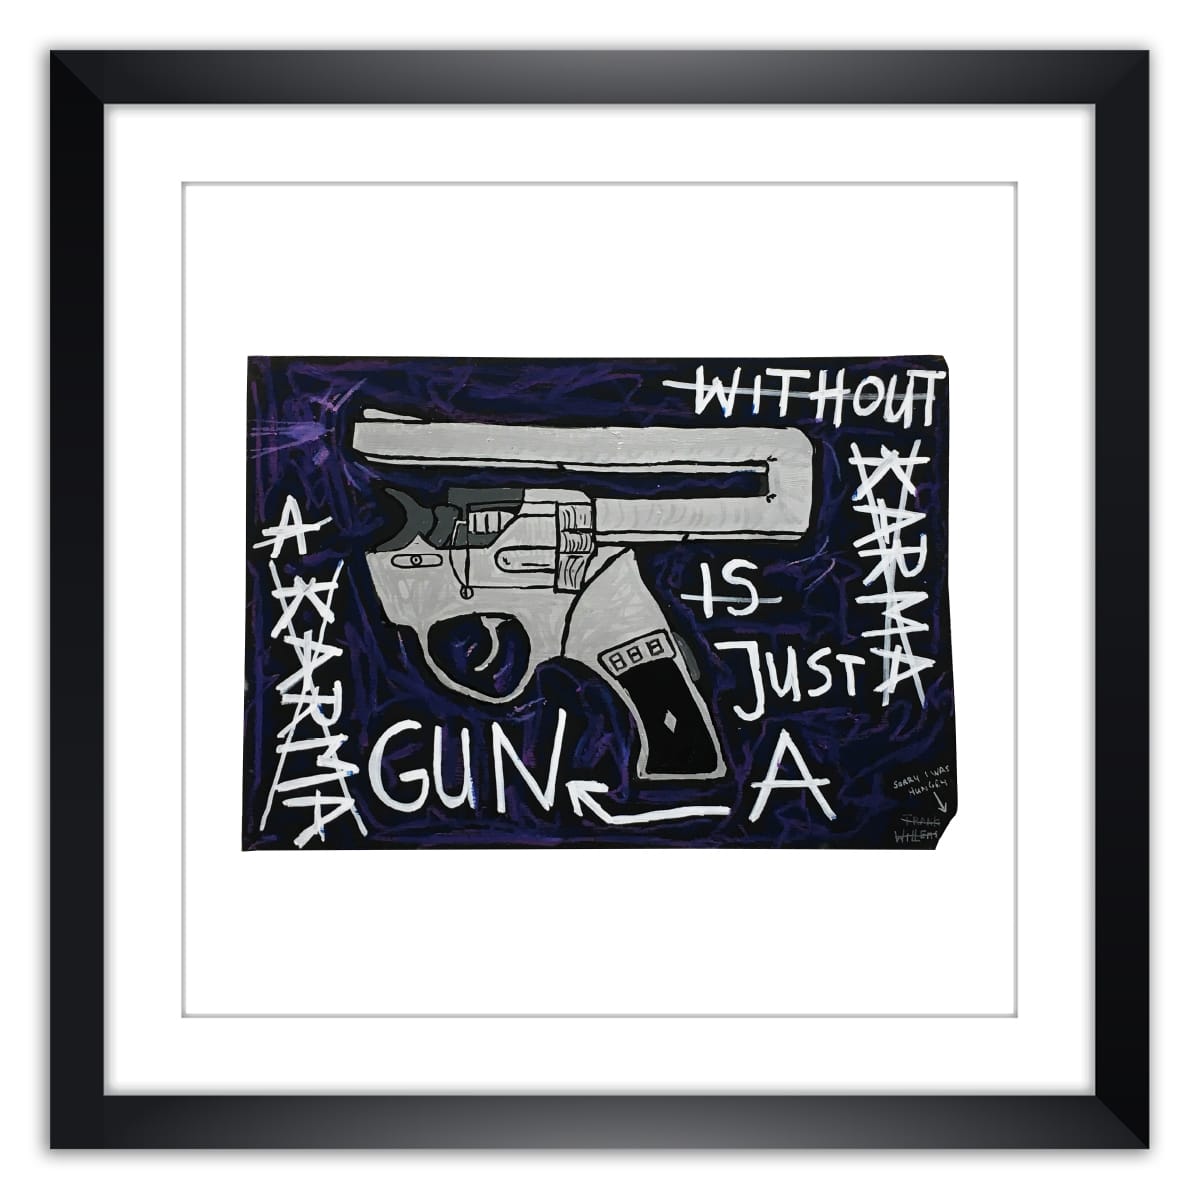 Limited prints - WHAT IS A KARMA GUN WITHOUT KARMA framed - Frank Willems